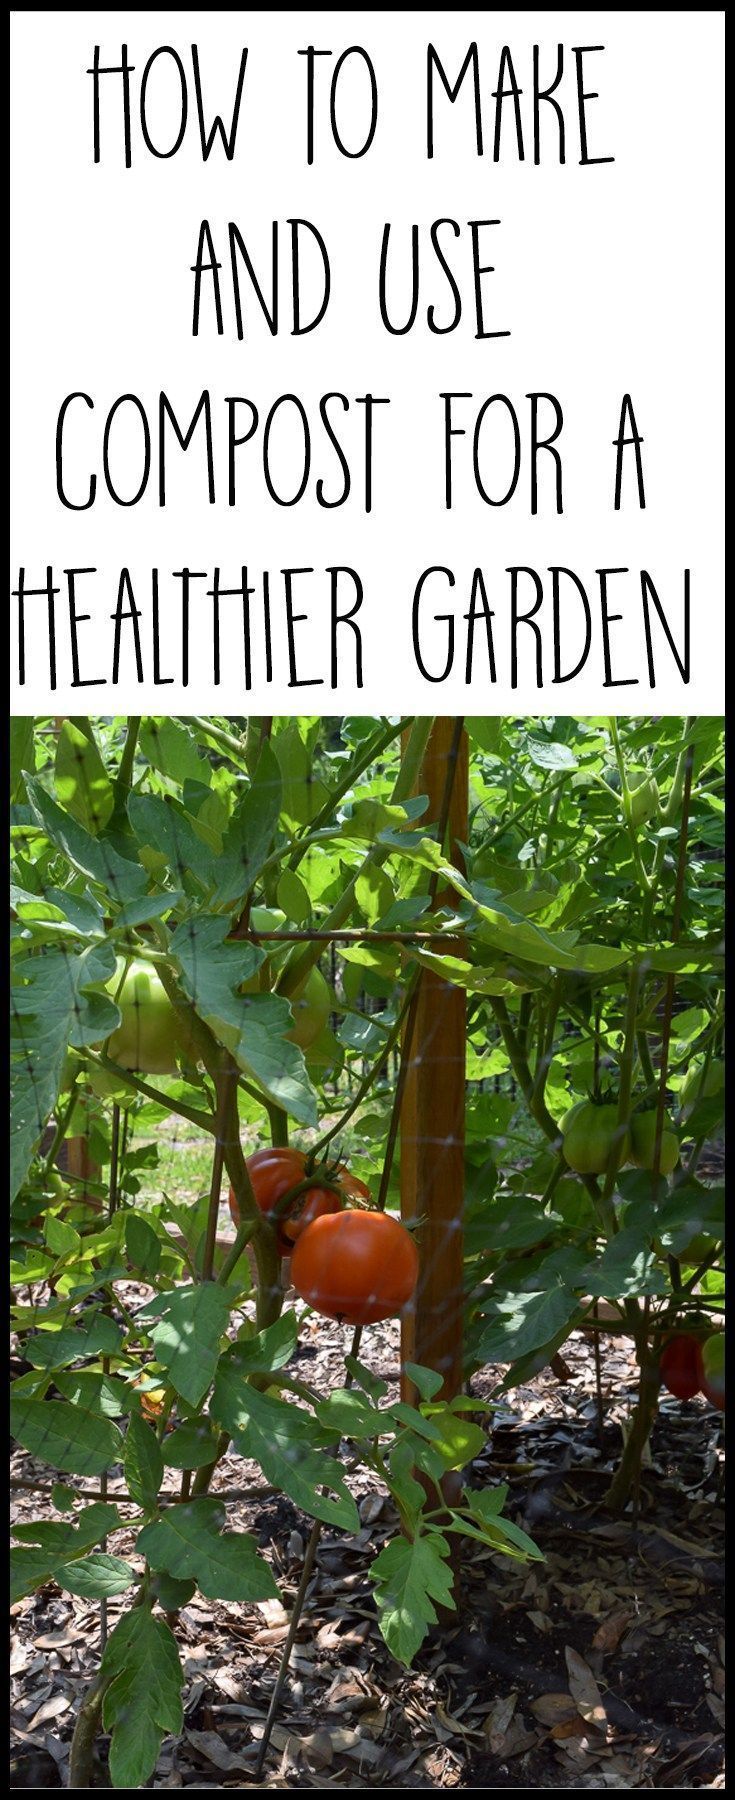 We realized very early on into our Organic Vegetable Garden journey that the qua...